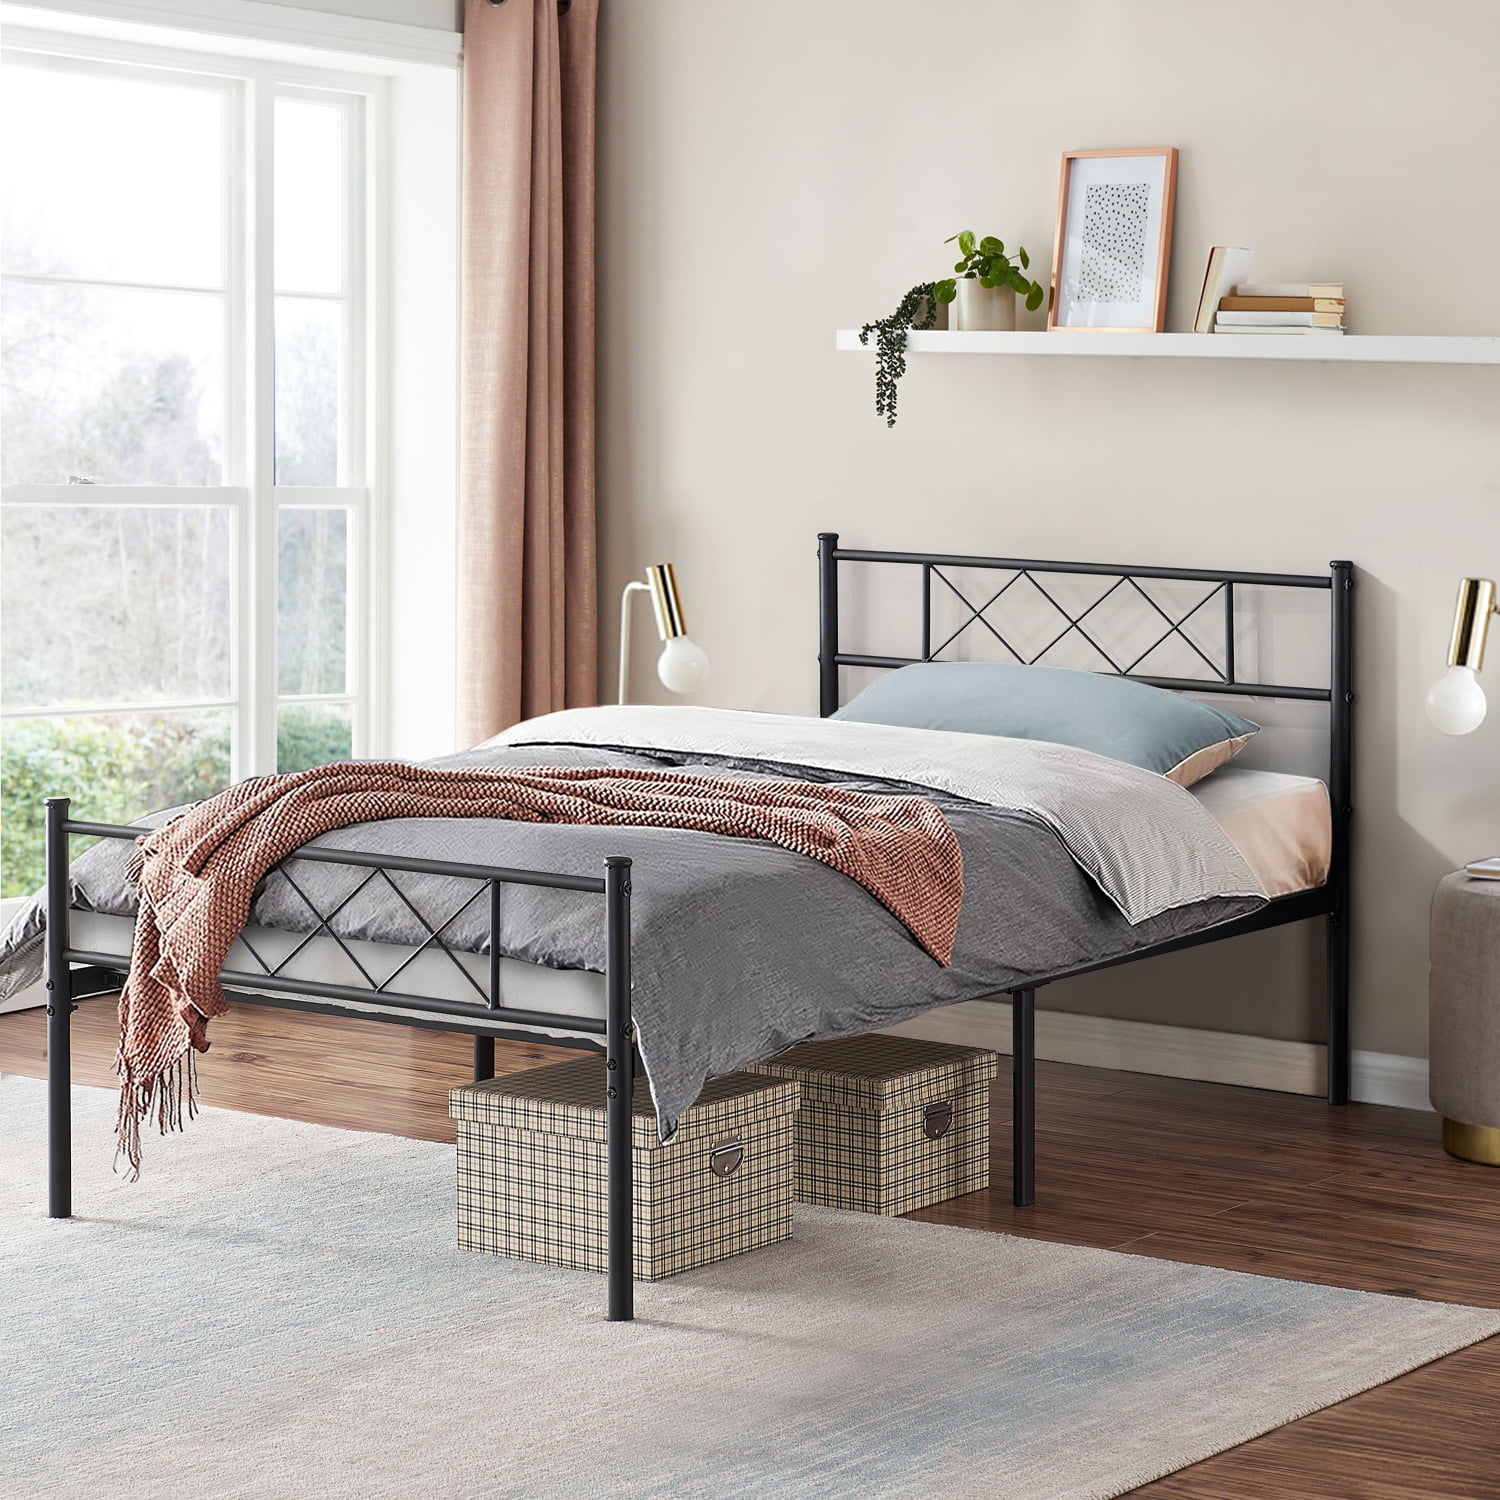 Twin Size Metal Platform Bed Frame With, Do You Need A Headboard And Footboard